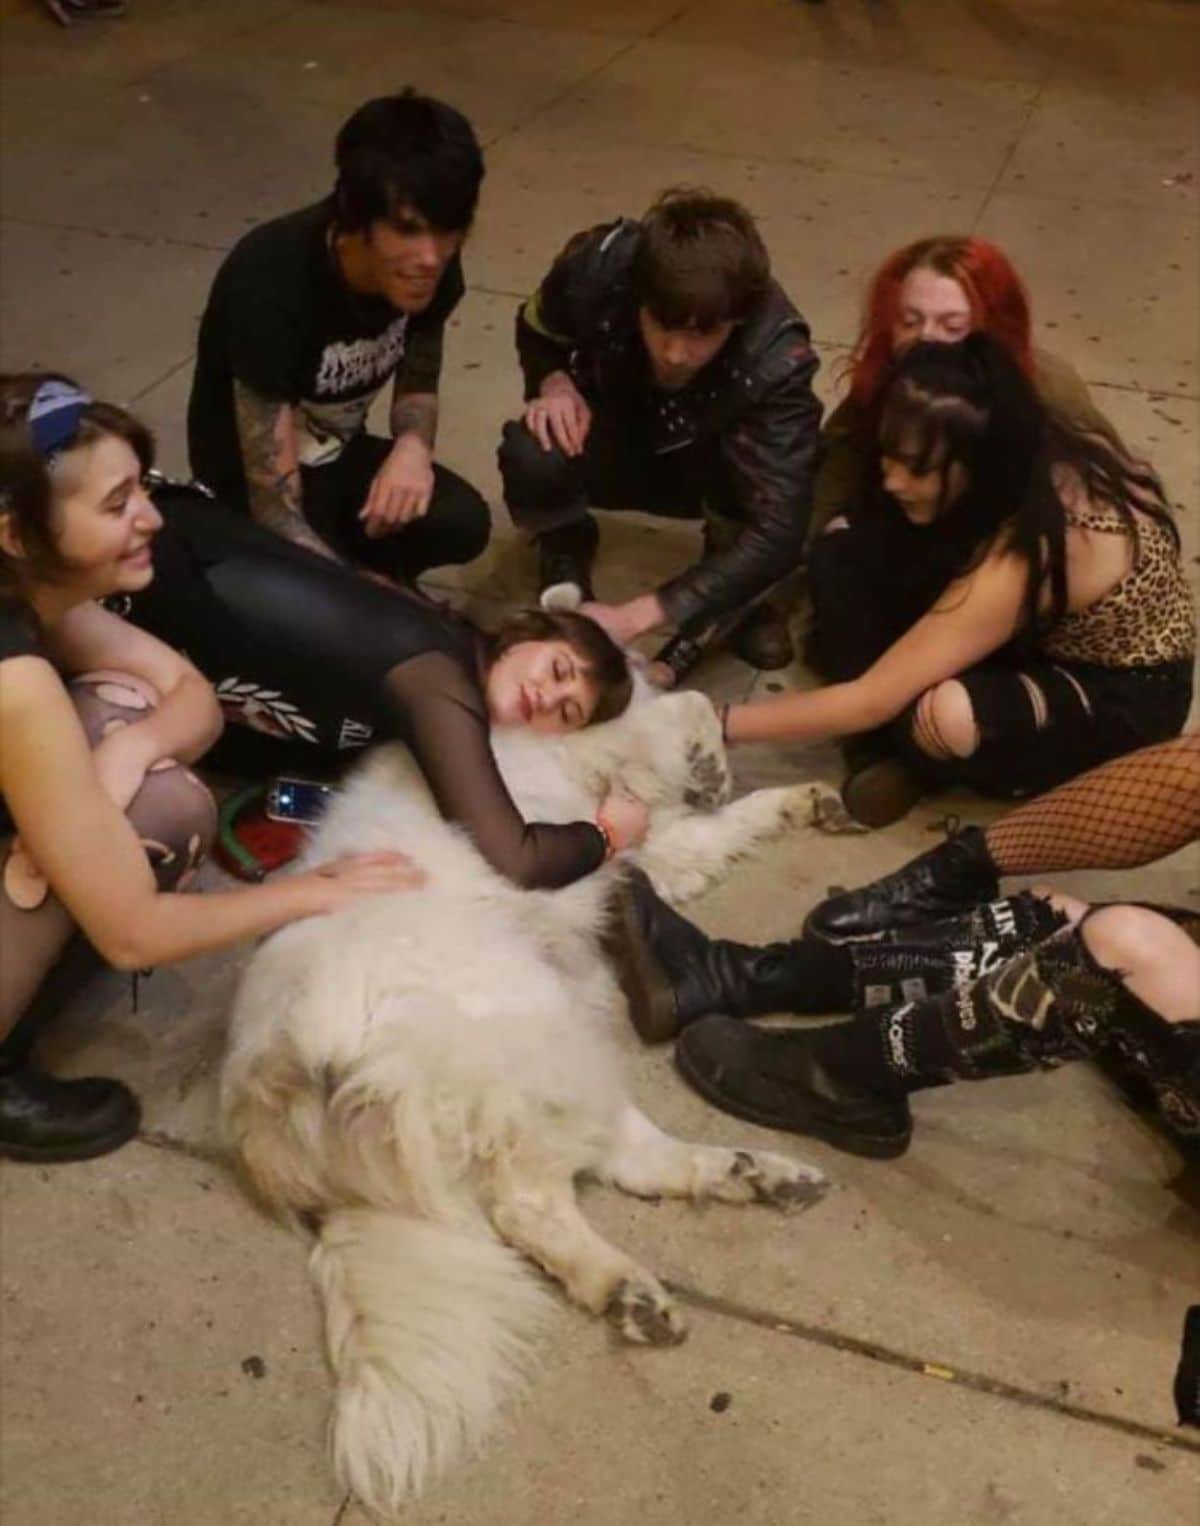 fluffy white dog laying sideways on the floor with 6 women and men petting the dog and 1 woman is hugging the dog